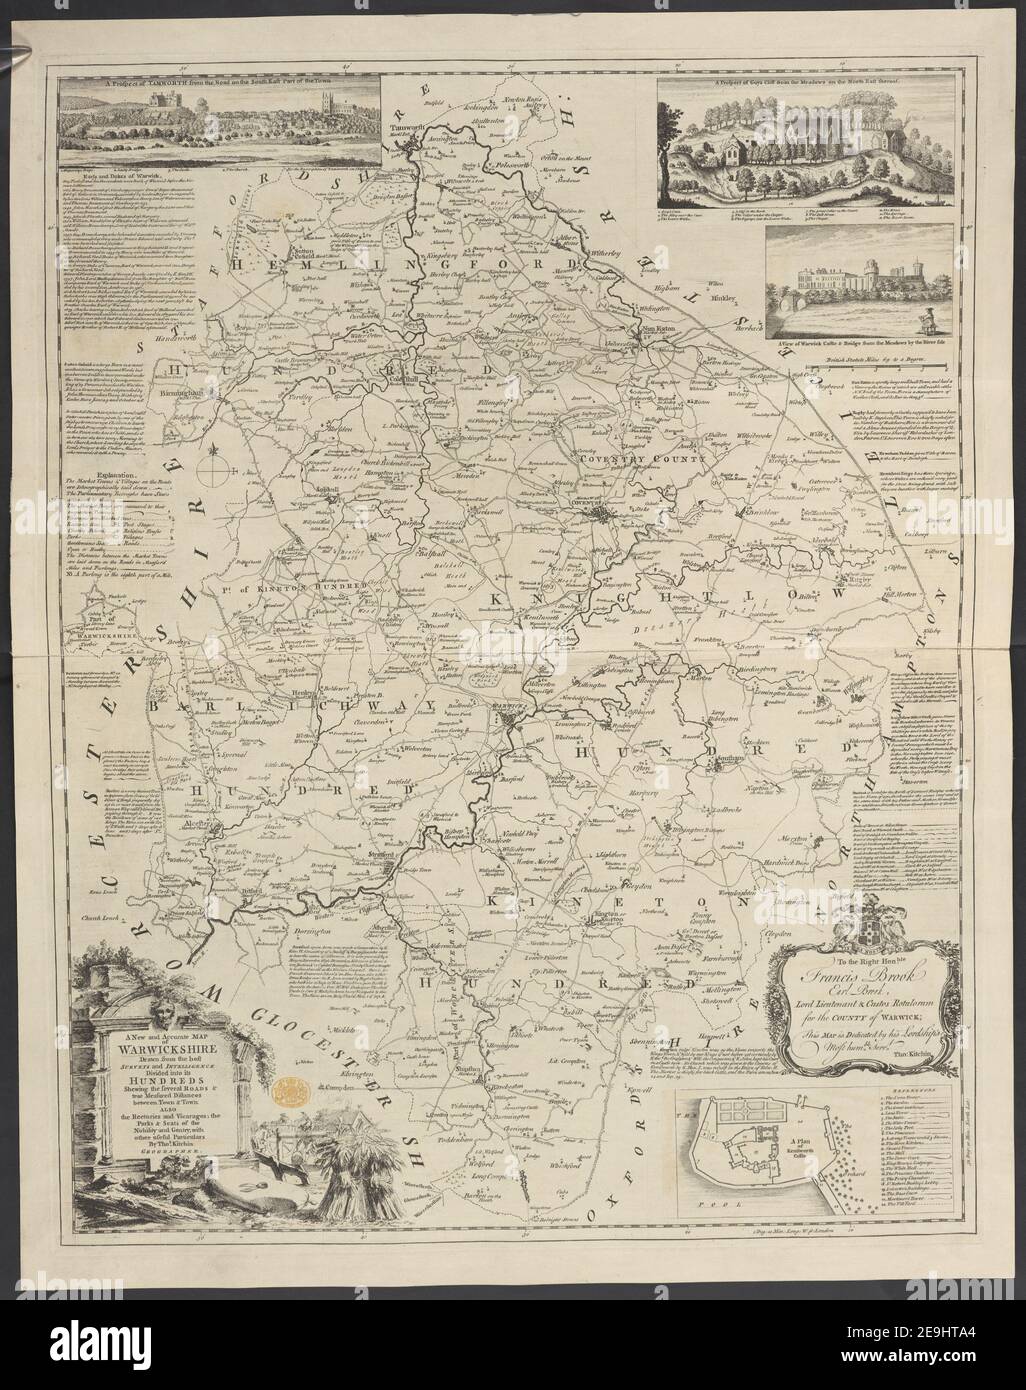 A New and Accurate MAP of WARWICKSHIRE  Author  Kitchin, Thomas 42.75. Place of publication: [London] Publisher: [Carington Bowles, Robt. Sayer , J. Bennett] Date of publication: [1777]  Item type: 1 map Medium: copperplate engraving Dimensions: 63.8 X 49.2 cm  Former owner: George III, King of Great Britain, 1738-1820 Stock Photo